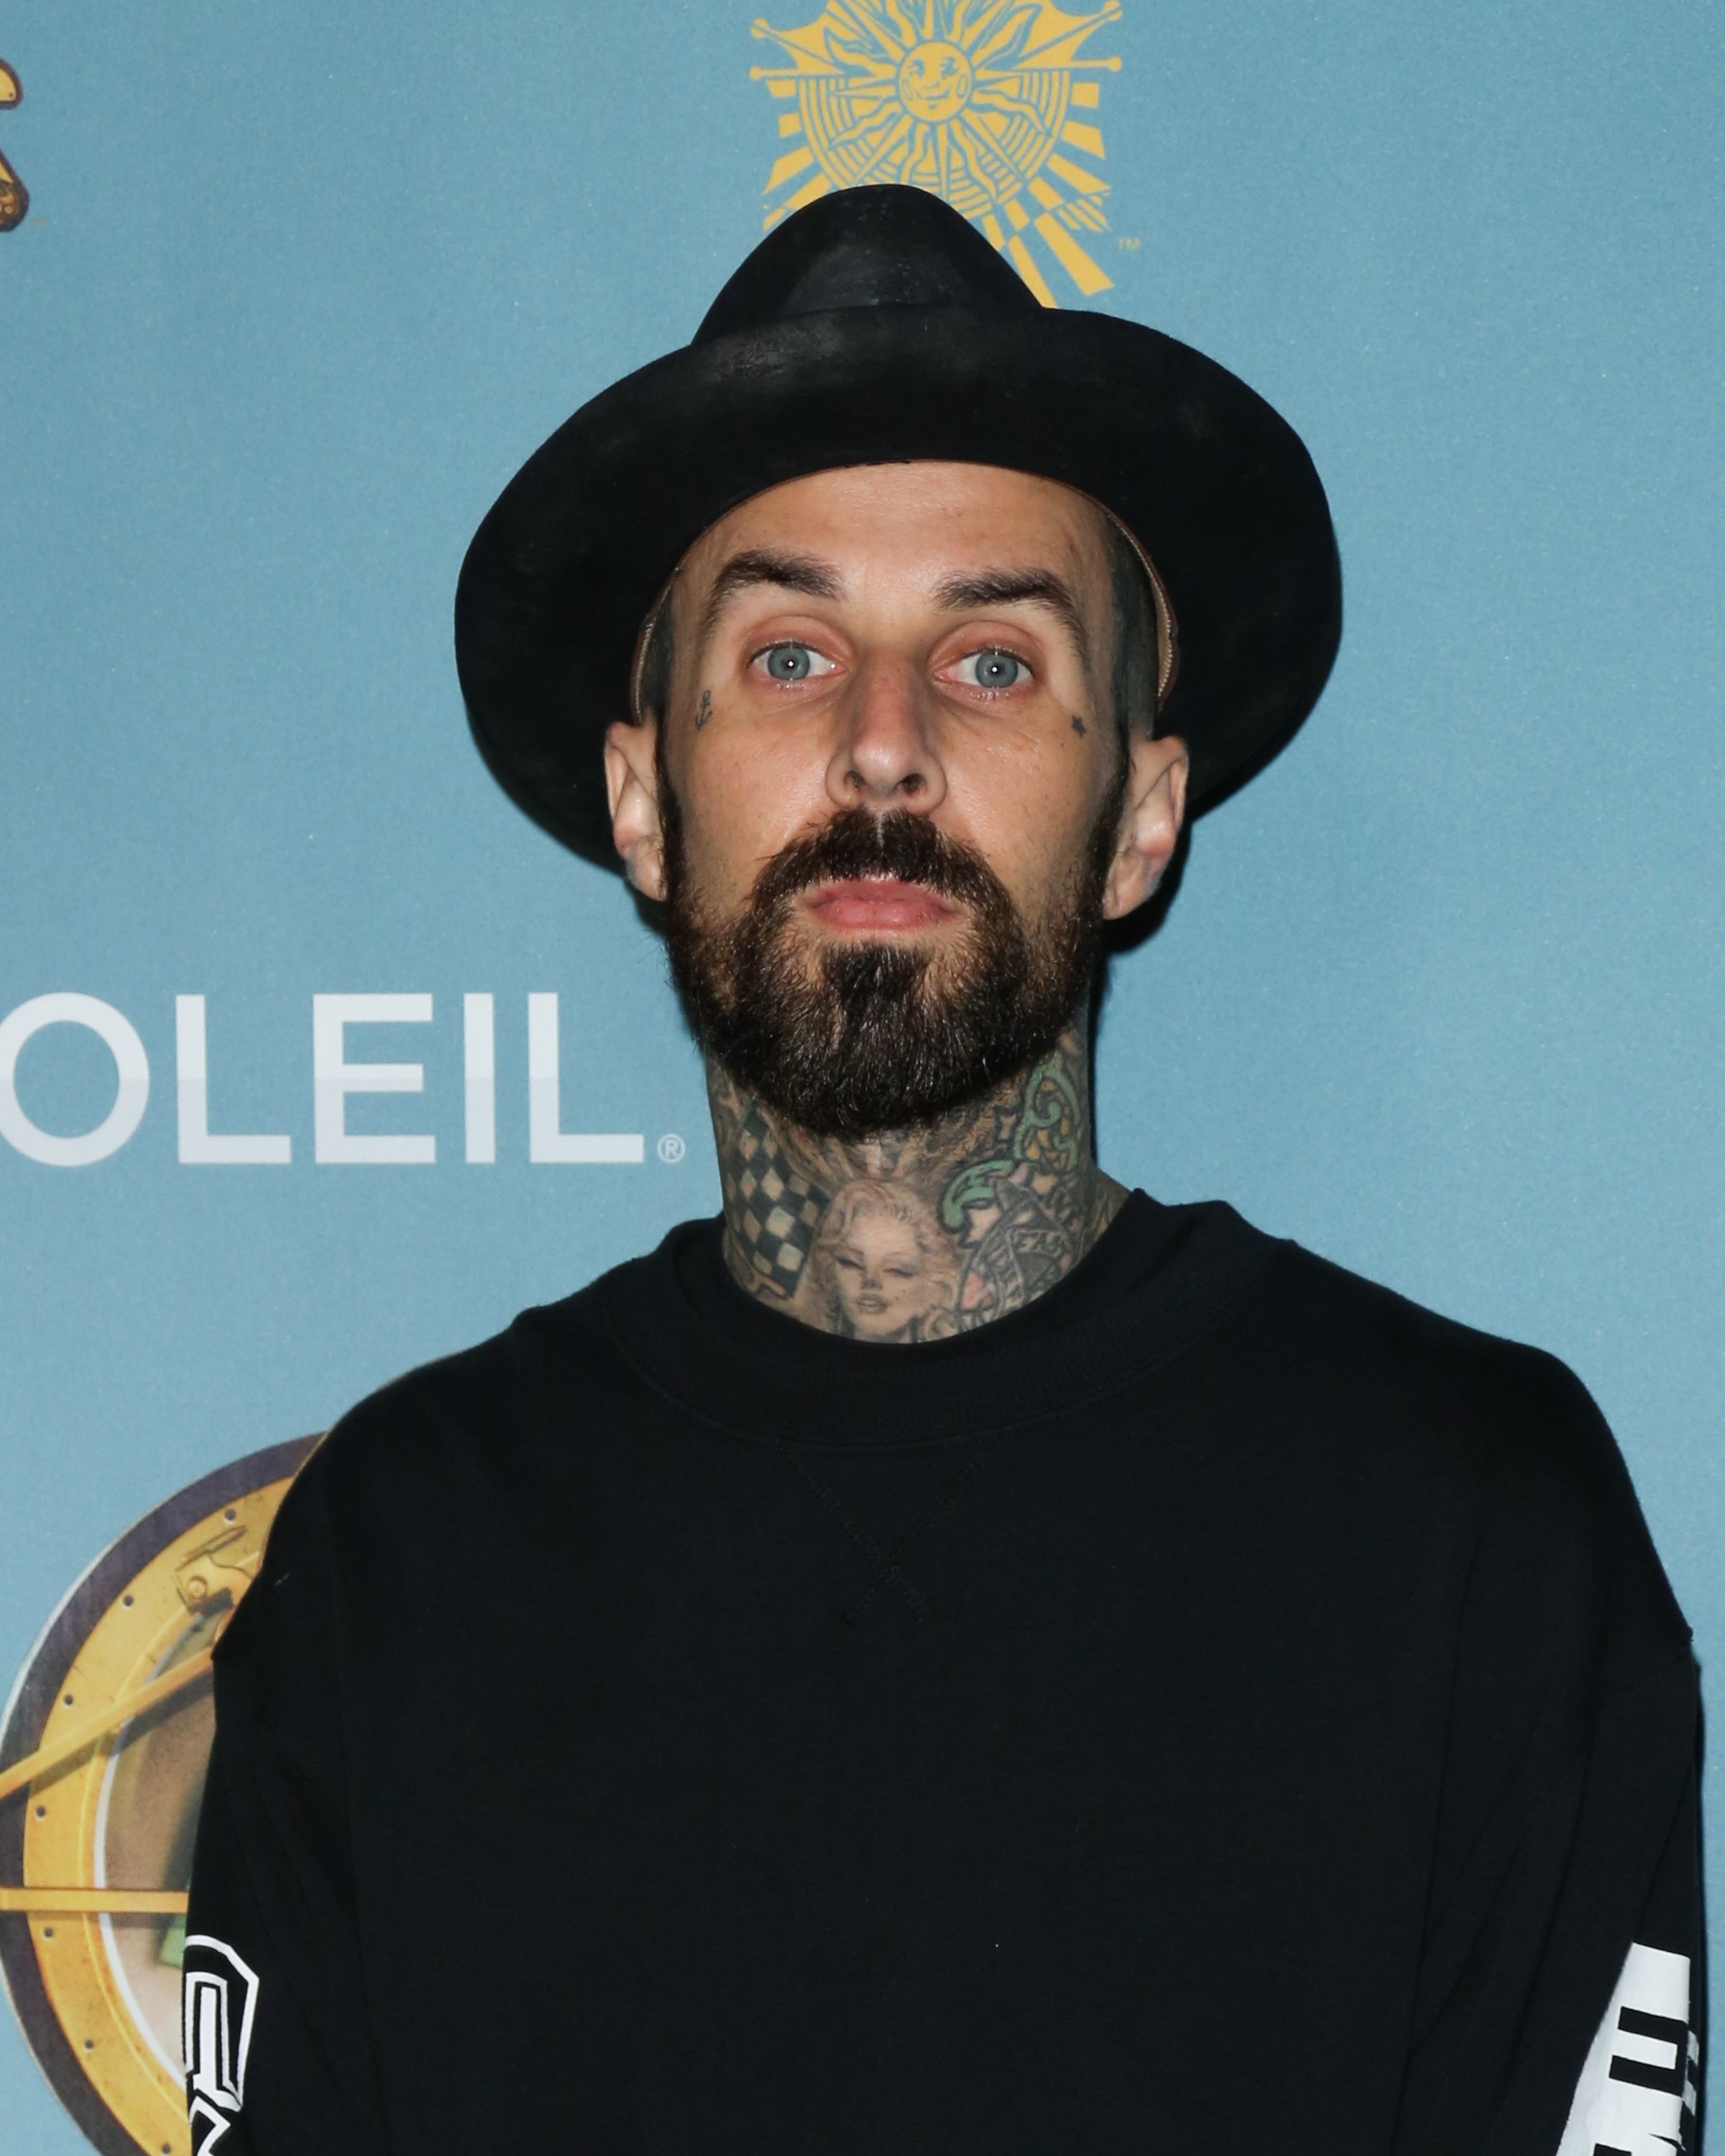 Travis Barker attends the opening night of Cirque Du Soleil's "Kurios - Cabinet Of Curiosities" at Dodger Stadium in Los Angeles in 2015. | Source: Getty Images